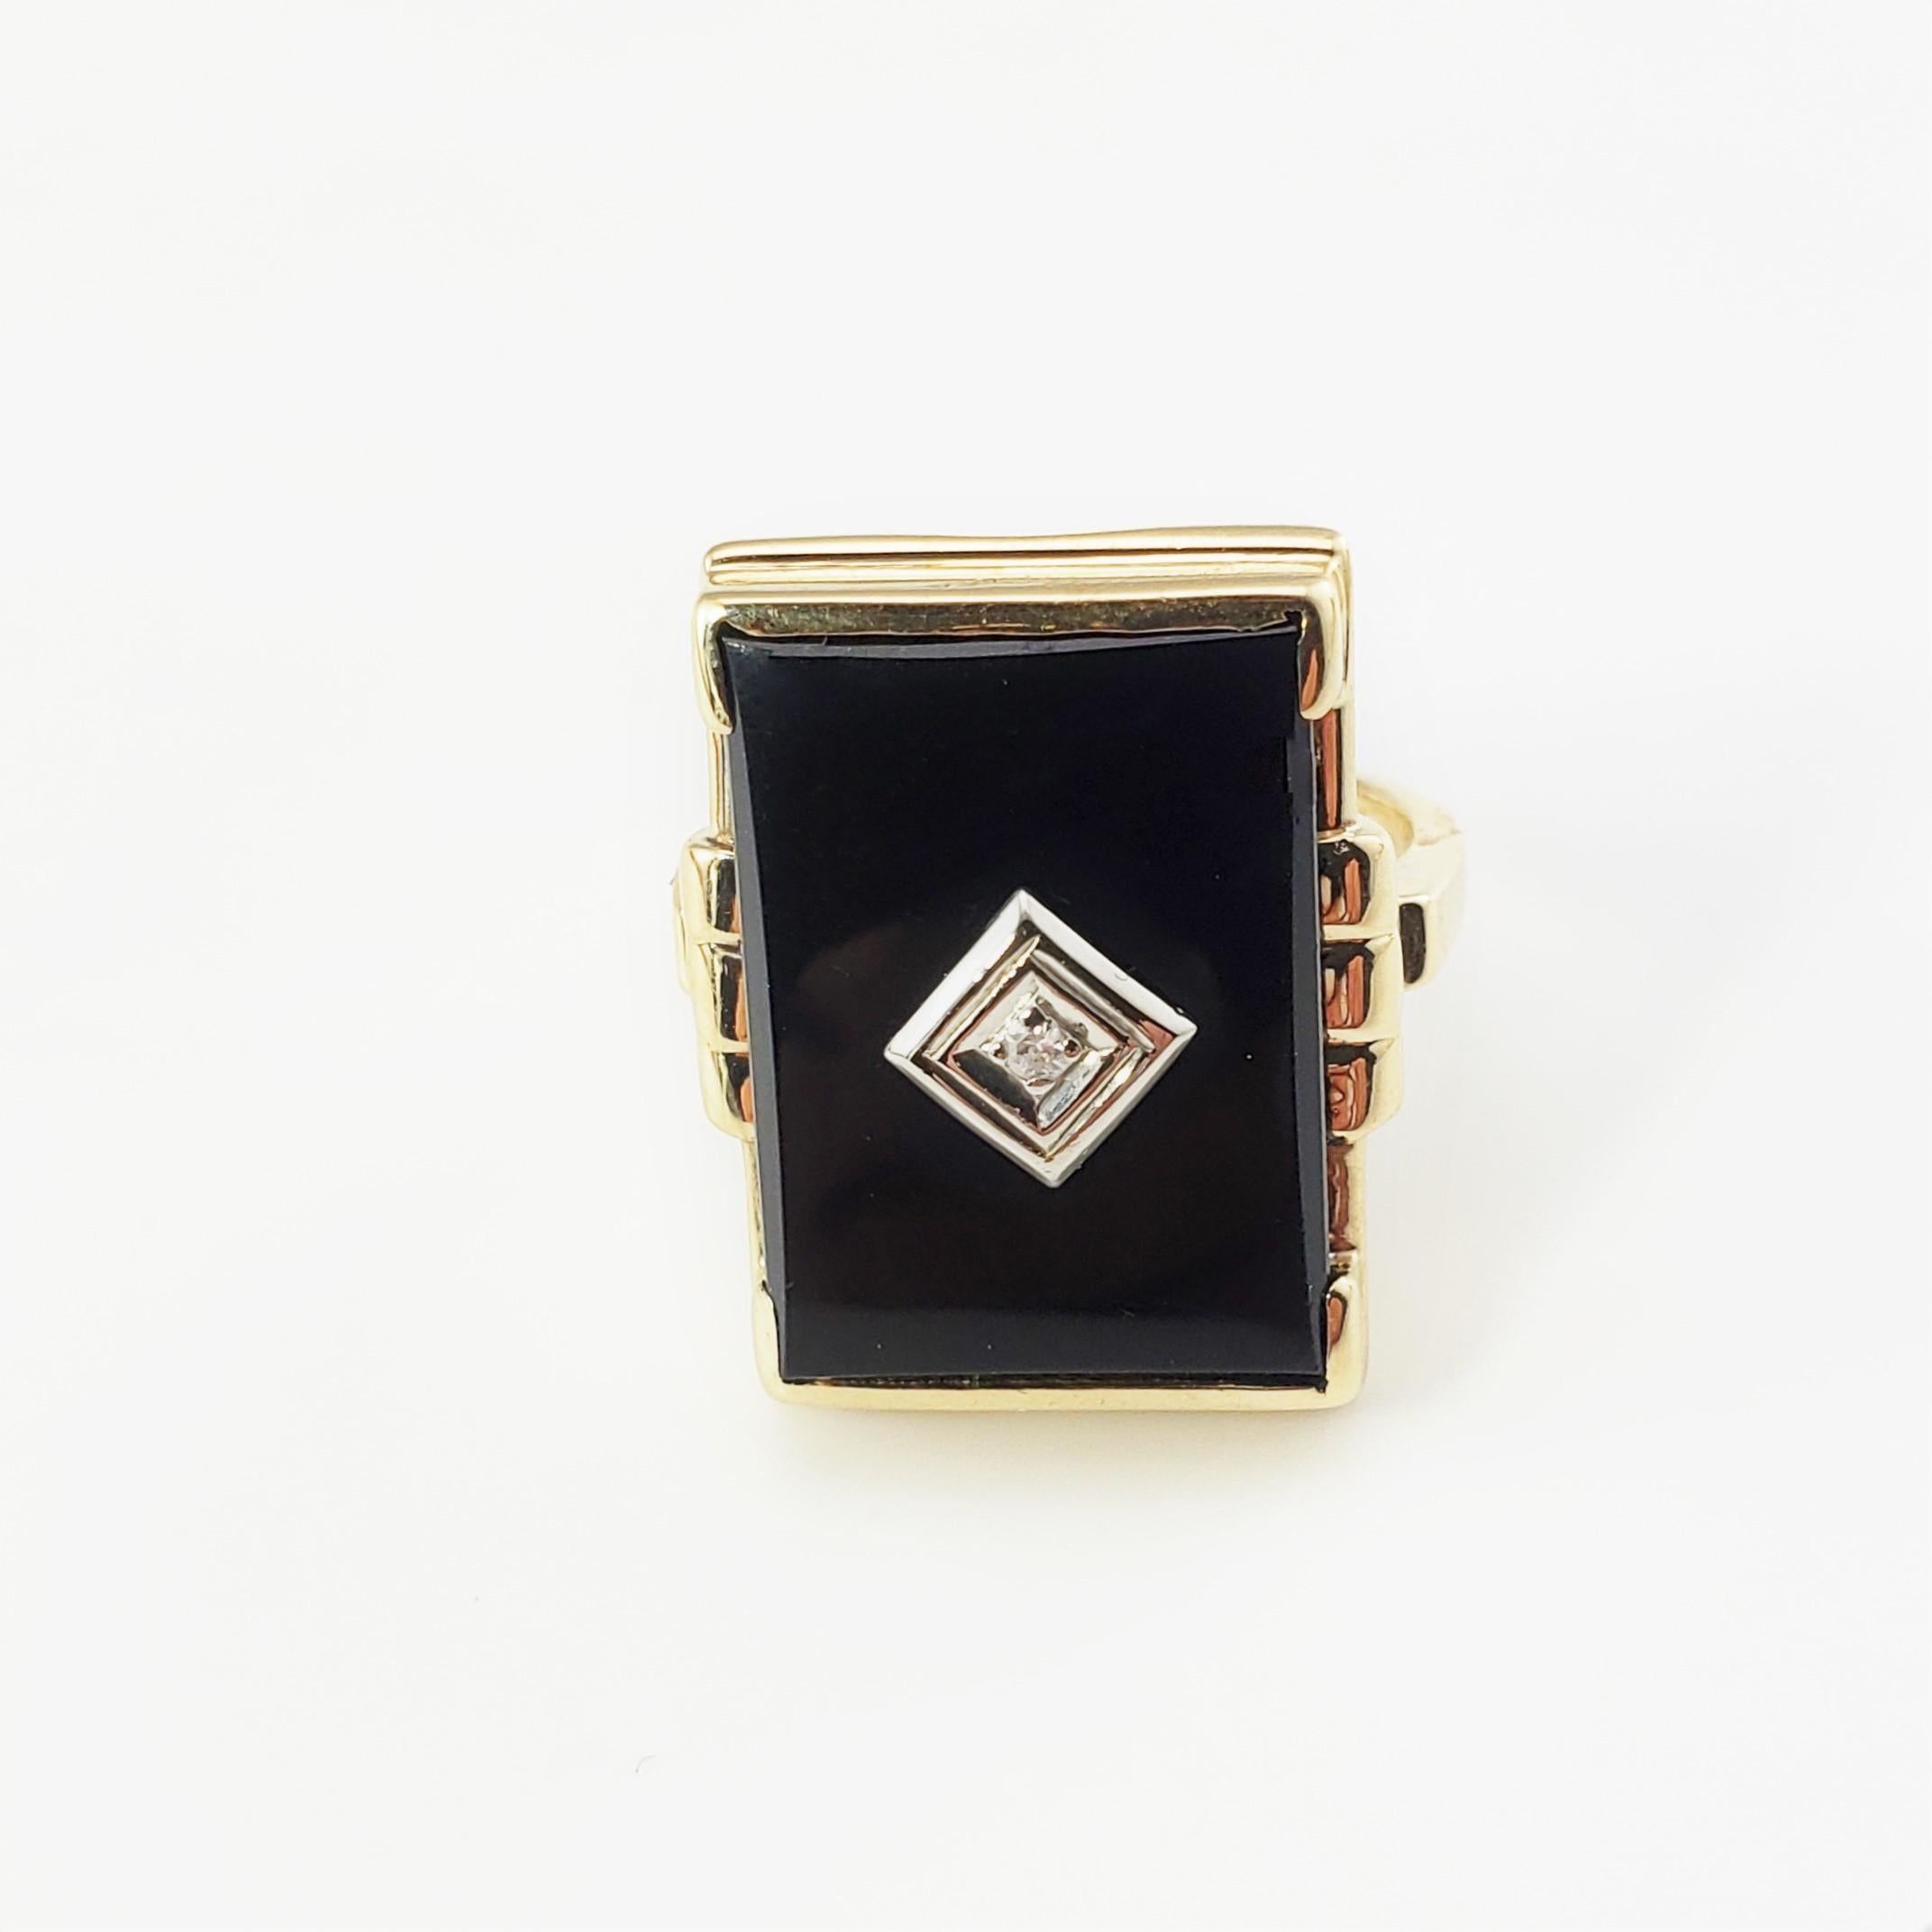 10 Karat Yellow Gold Onyx and Diamond Ring Size 6-

This lovely ring features one rectangular onyx stone and one round single cut diamond set in classic 10K yellow gold.  Top of ring measures 21 mm x 16 mm.  Shank measures 2 mm.

Total diamond